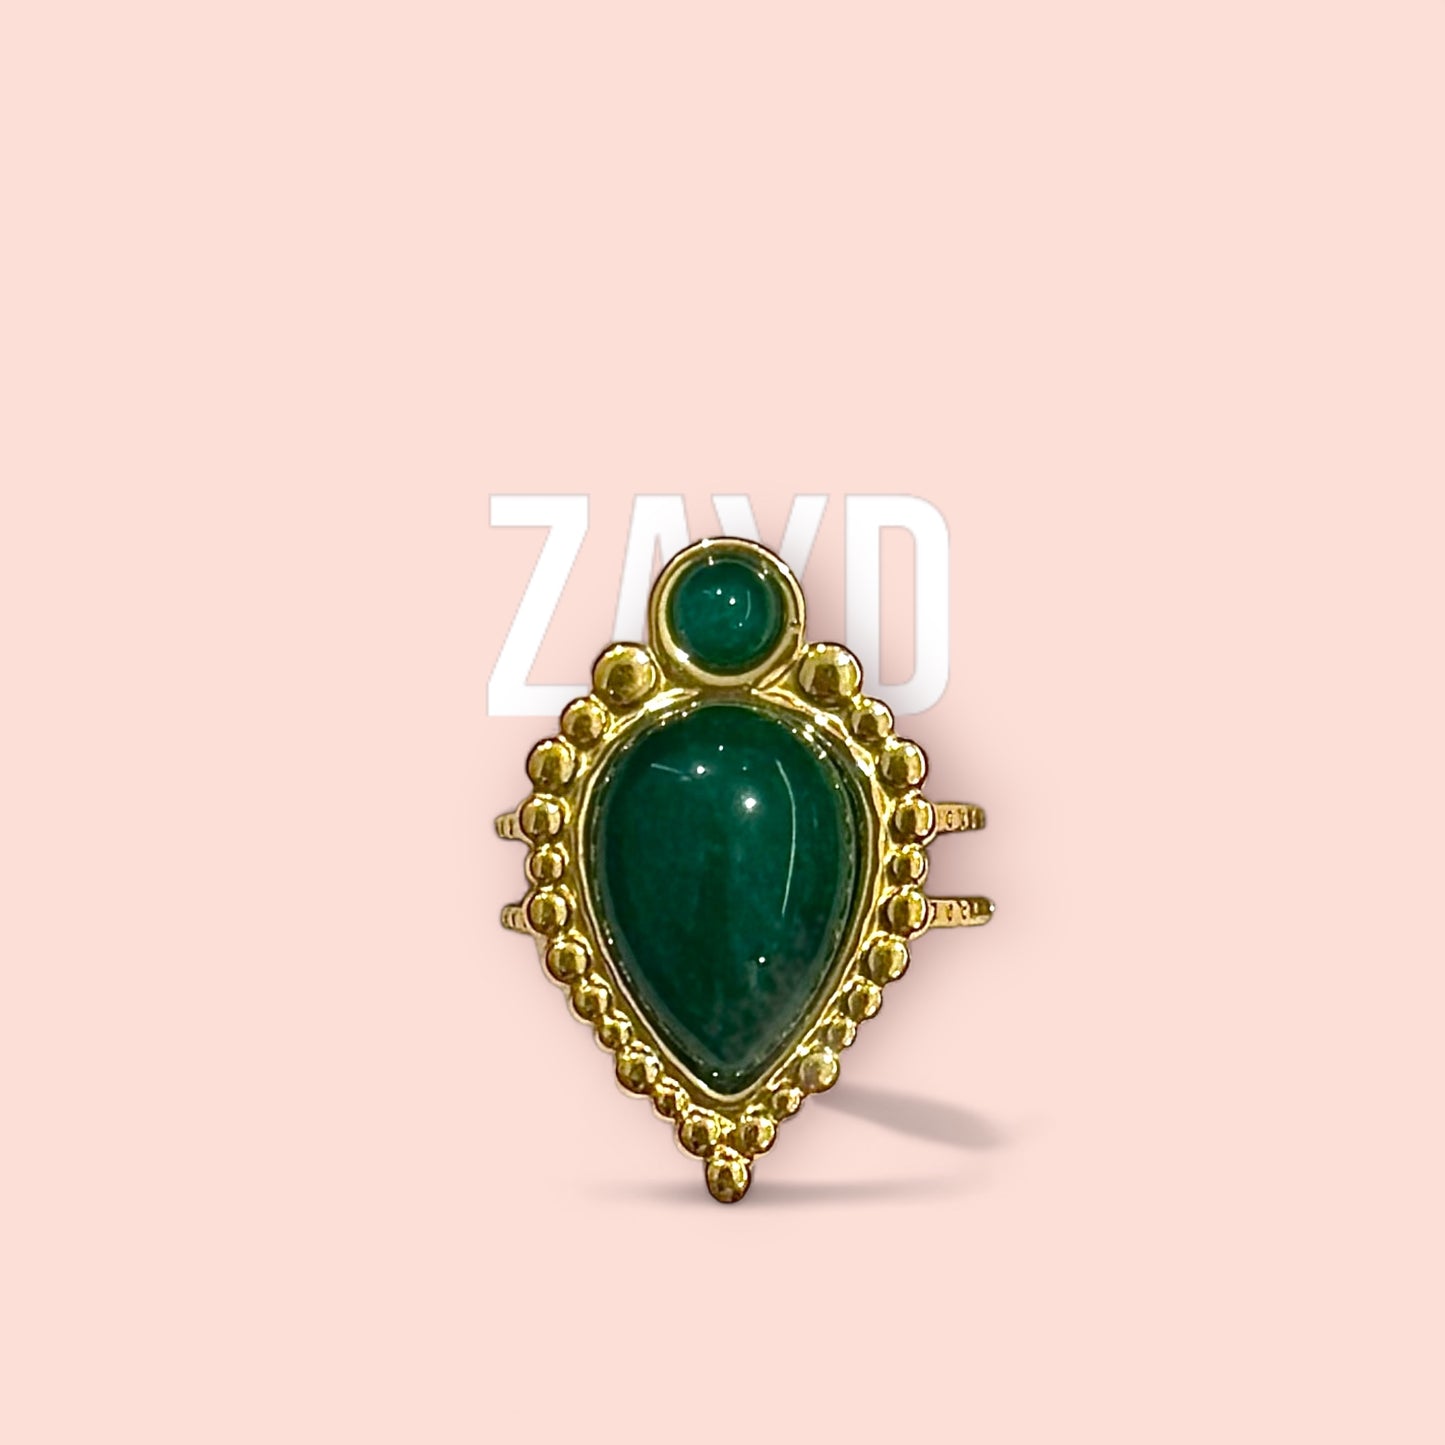 The ZAYD ring 